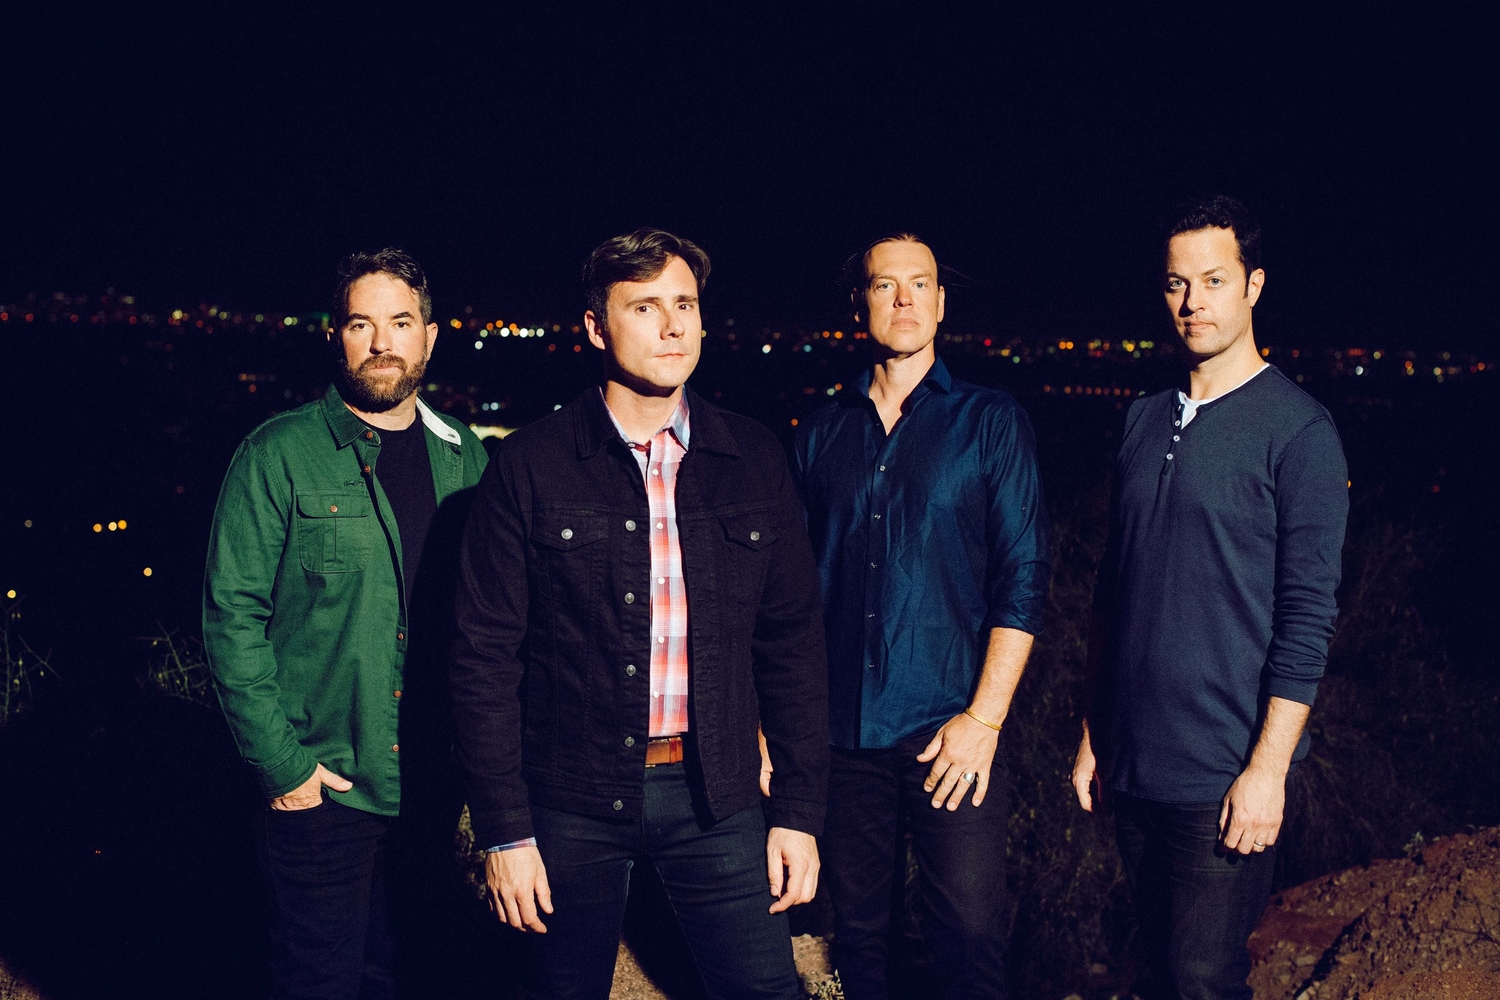 Jimmy Eat World announce new live dates, including 2000 Trees headline